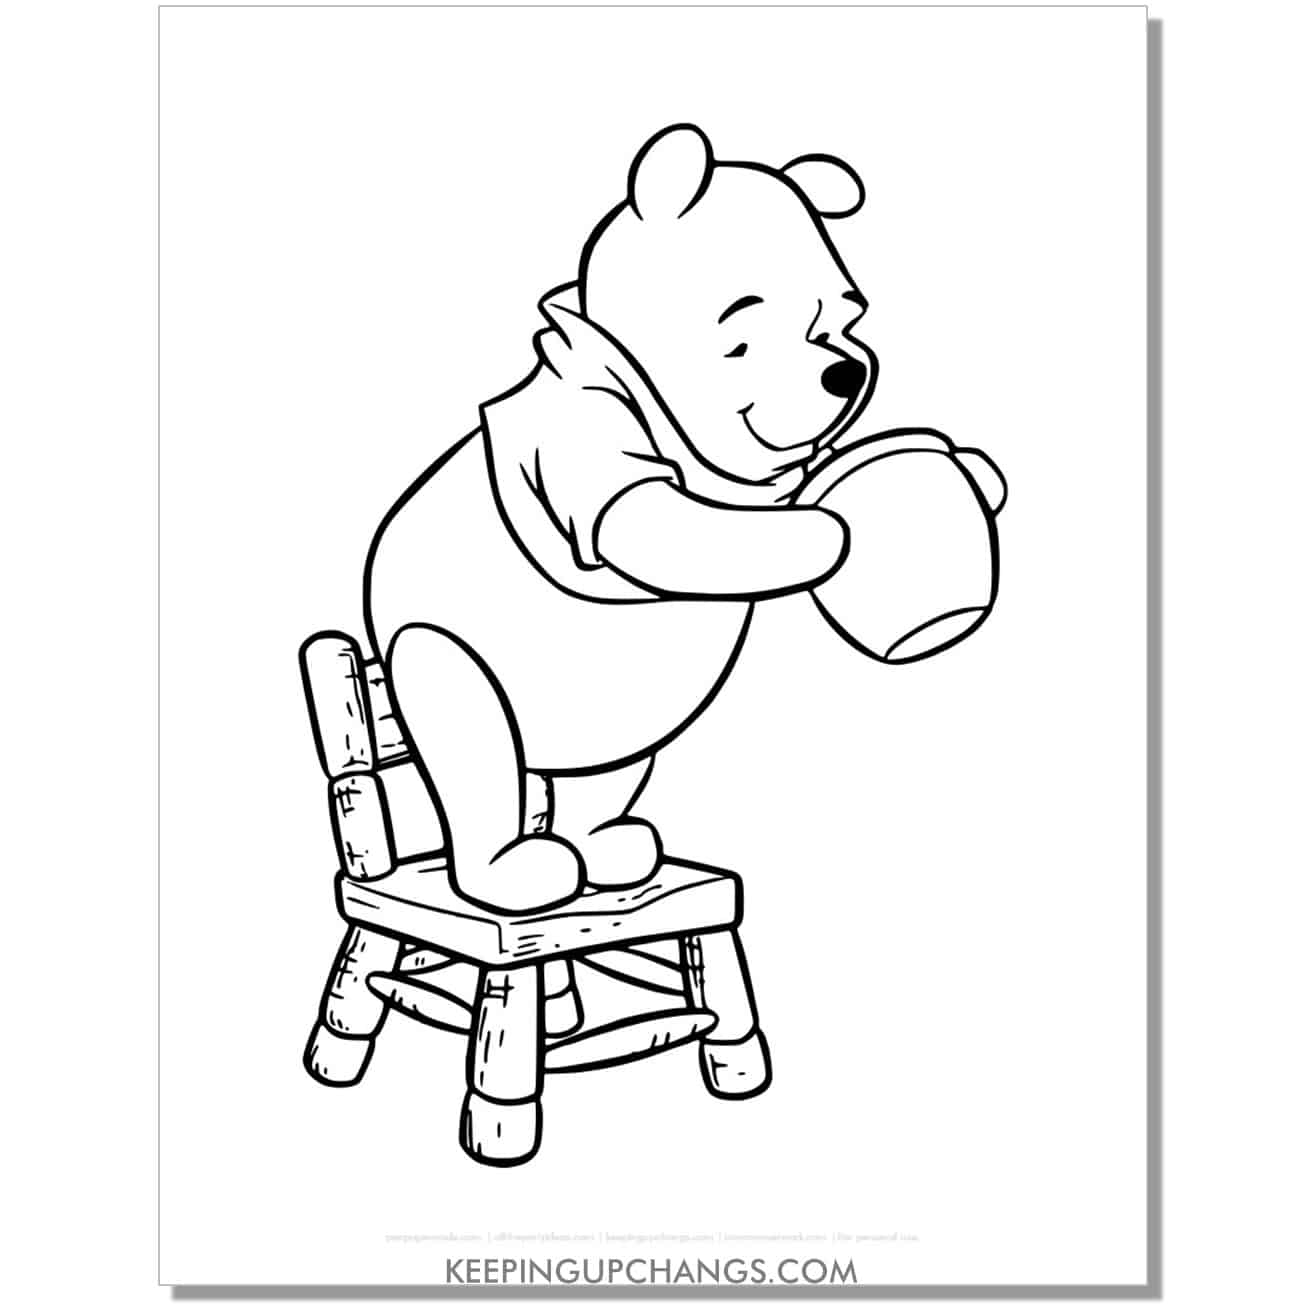 winnie the pooh standing on chair looking into honey pot coloring page, sheet.